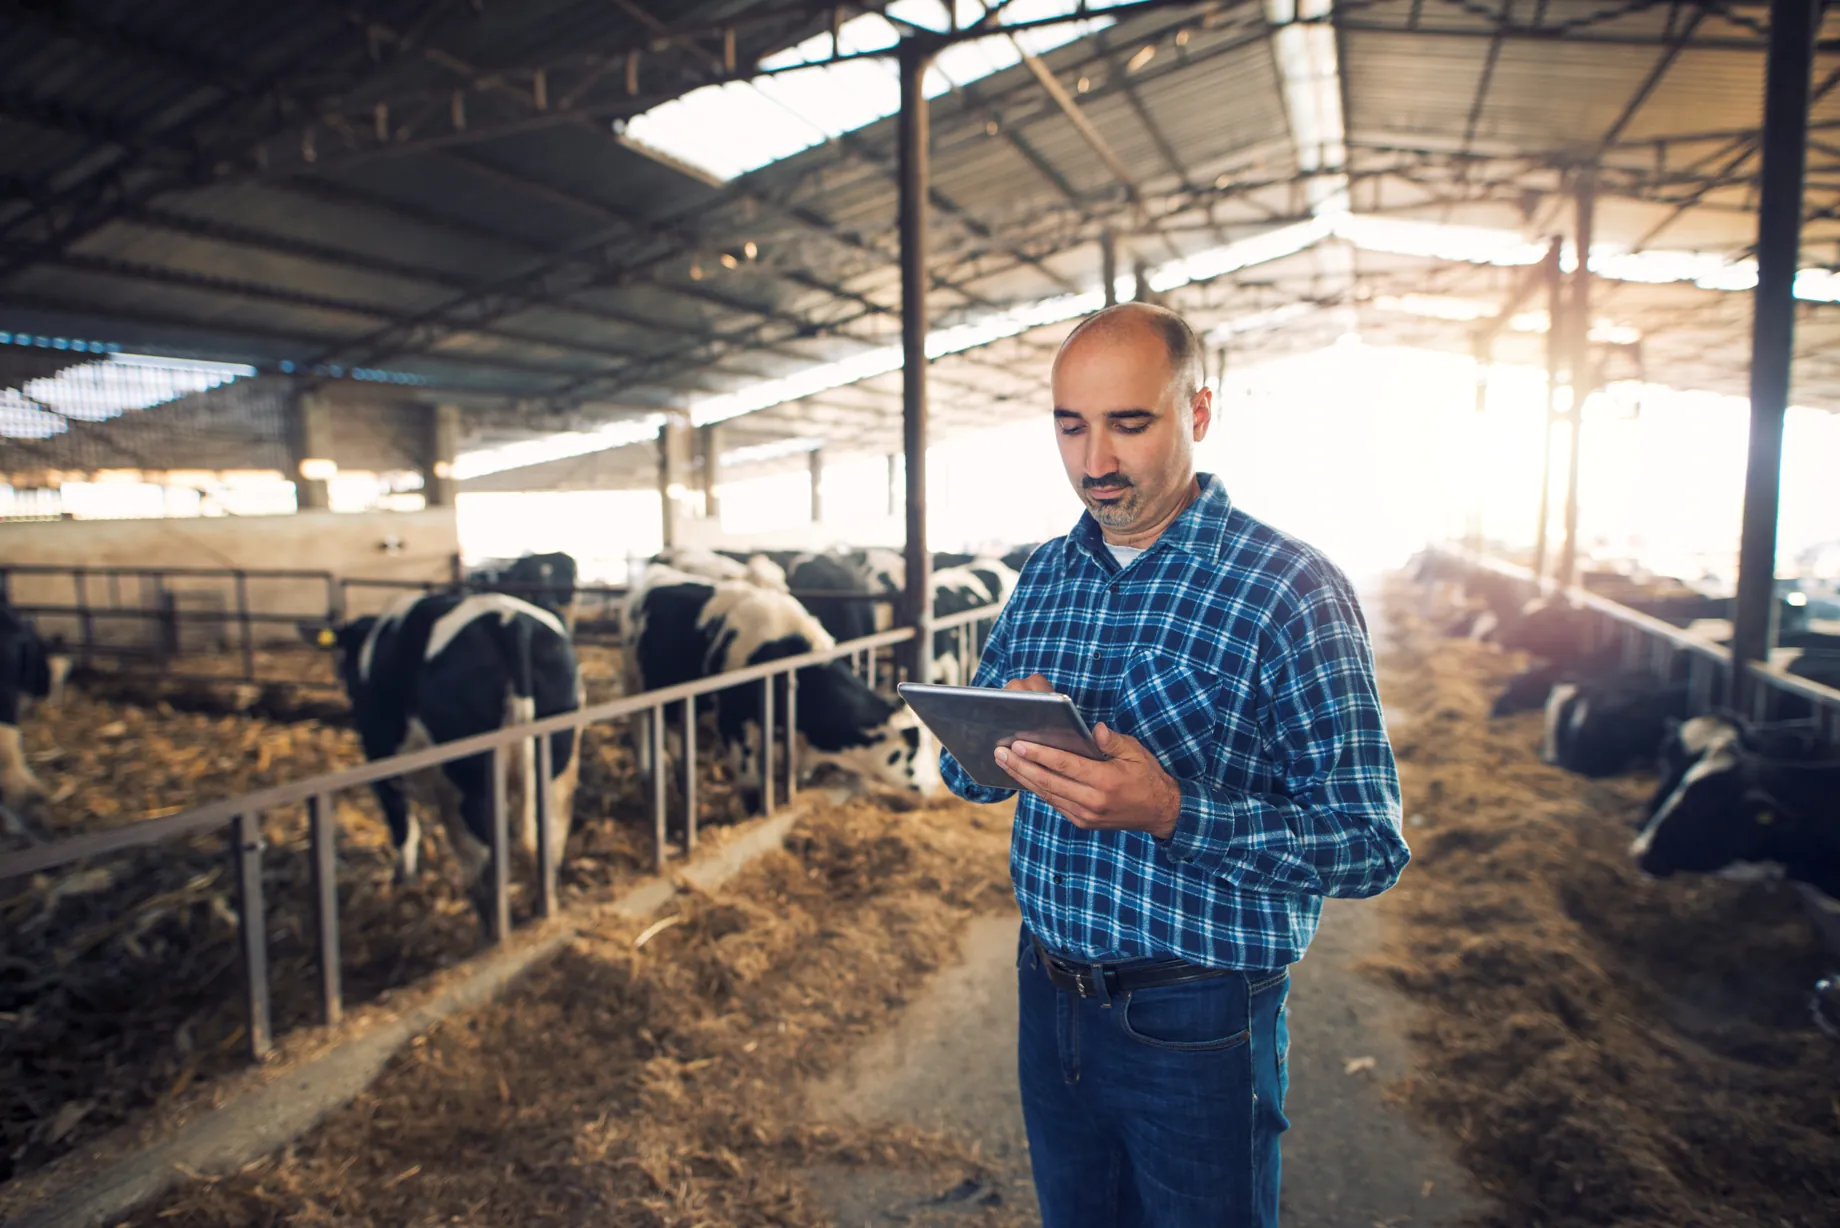 How Does Digital Livestock Farming Technology Affect Agriculture?